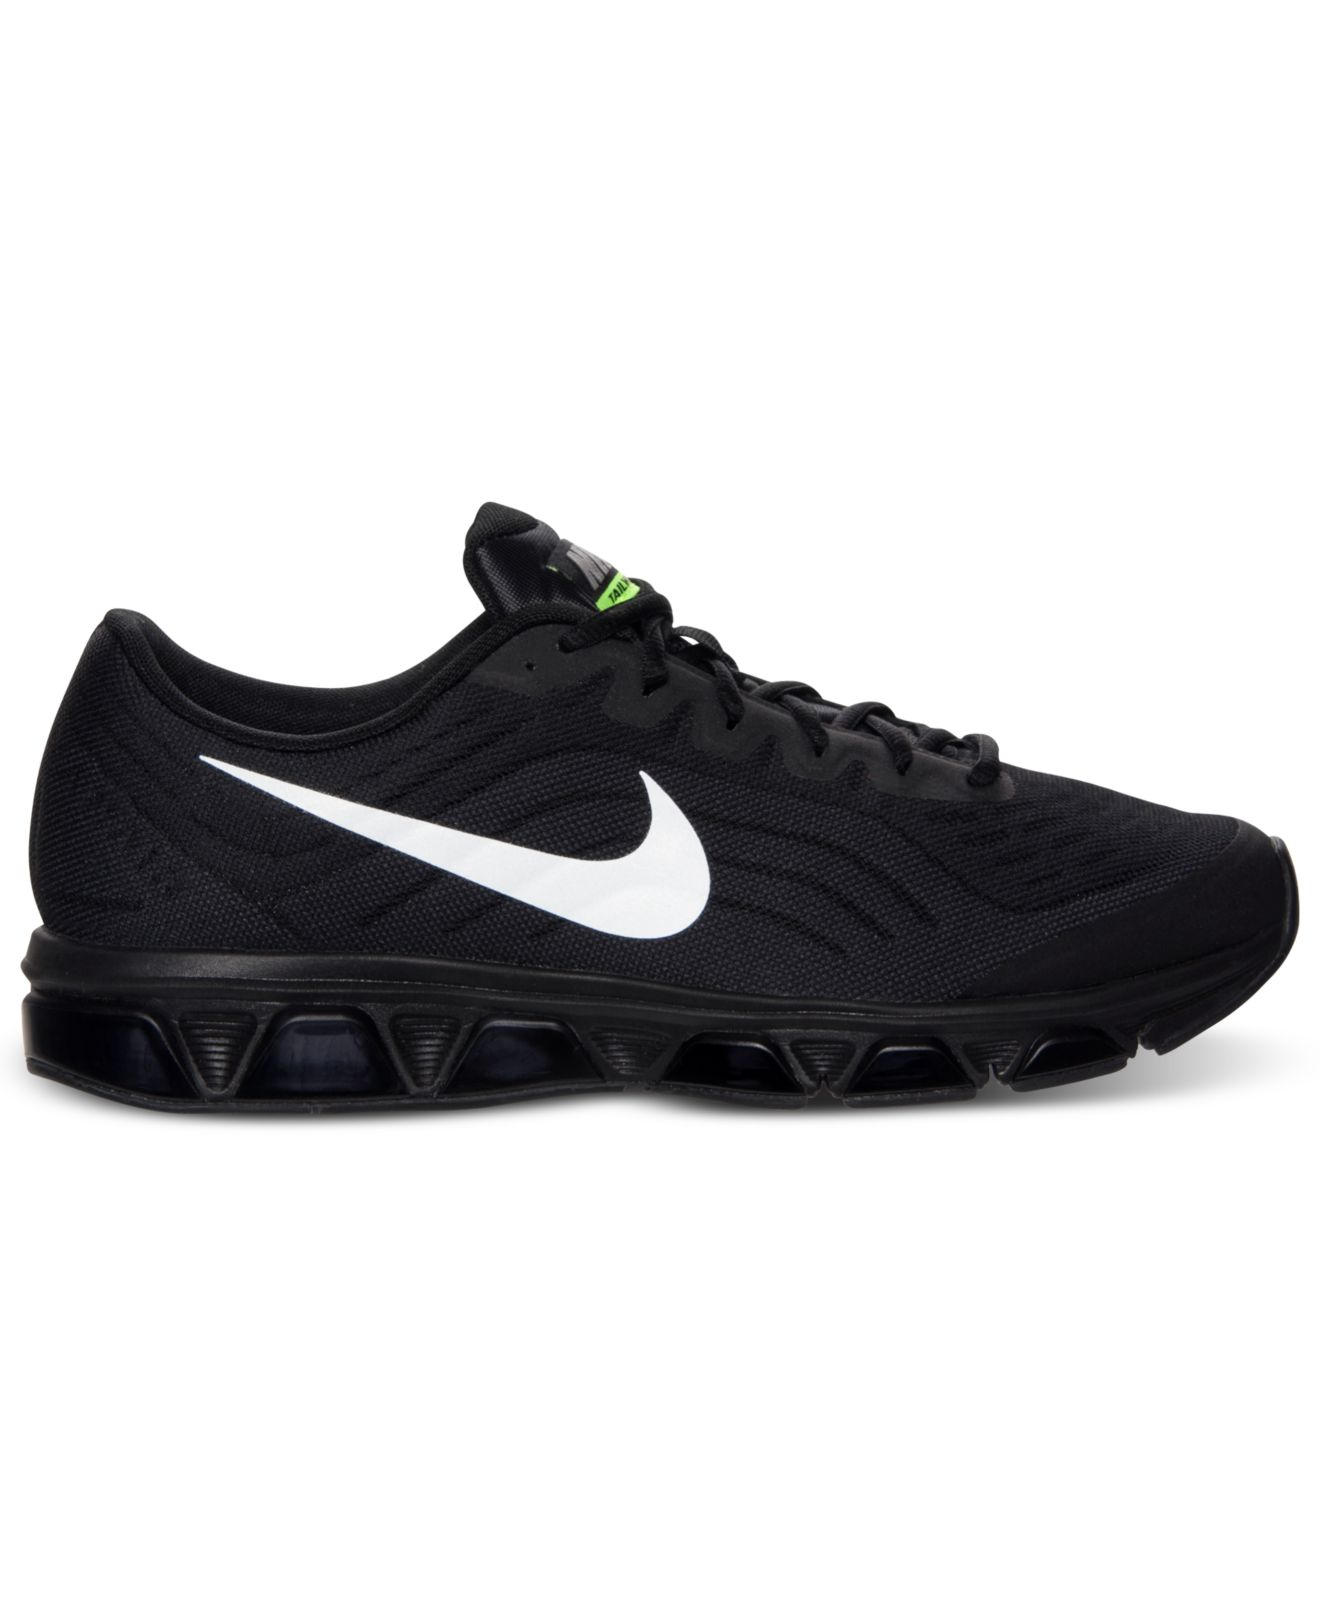 Lyst - Nike Men'S Air Max Tailwind 6 Running Sneakers From Finish Line ...